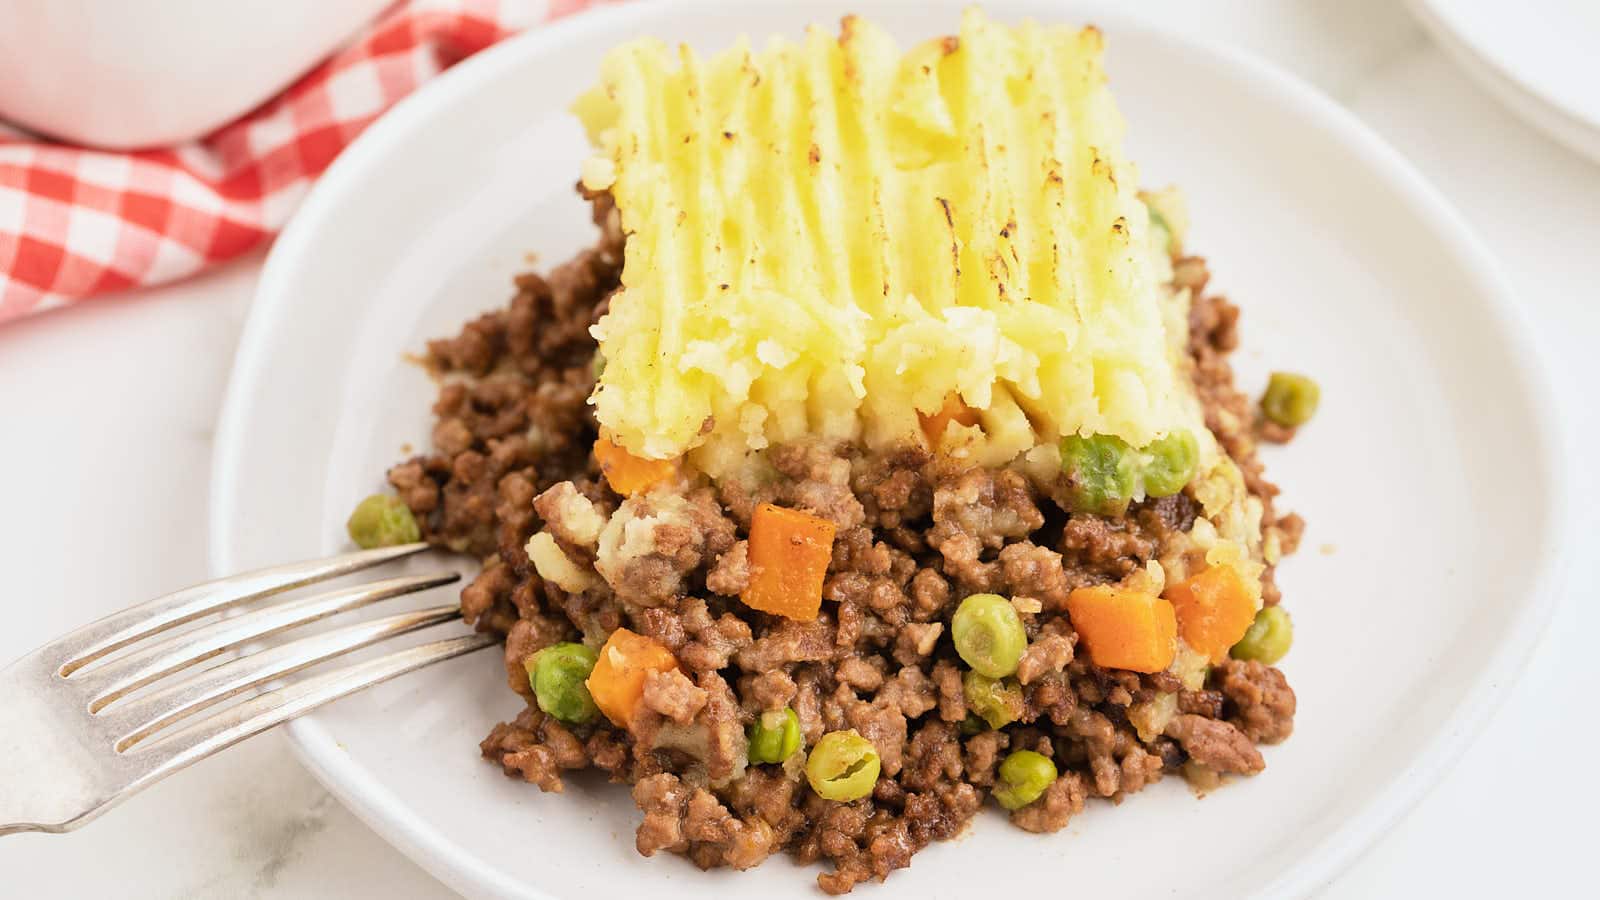 <p>Our easy 1-hour <strong>Shepherd's Pie</strong> is comfort food at its finest, perfect for feeding the whole family. Its hearty layers of ground beef, peas and carrots, and fluffy mashed potatoes make it a crowd-pleaser.</p><p><strong>Get The Recipe:</strong> <strong><a href="https://cheerfulcook.com/easy-shepherds-pie/" rel="noreferrer noopener">Easy Shepherd's Pie</a></strong></p>